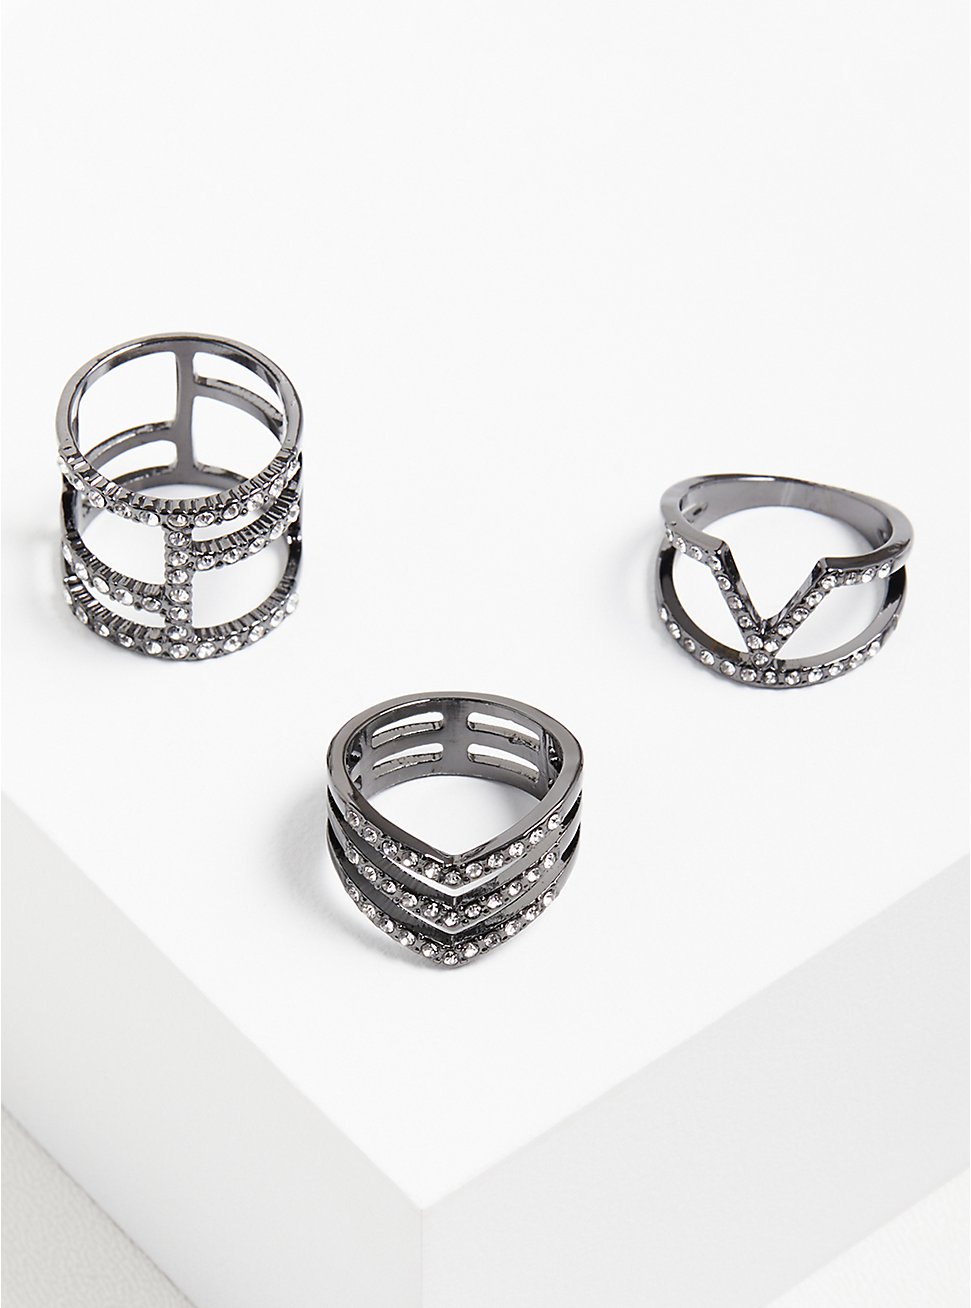 Statement Rings - Hematite Tone Pave, SILVER, hi-res